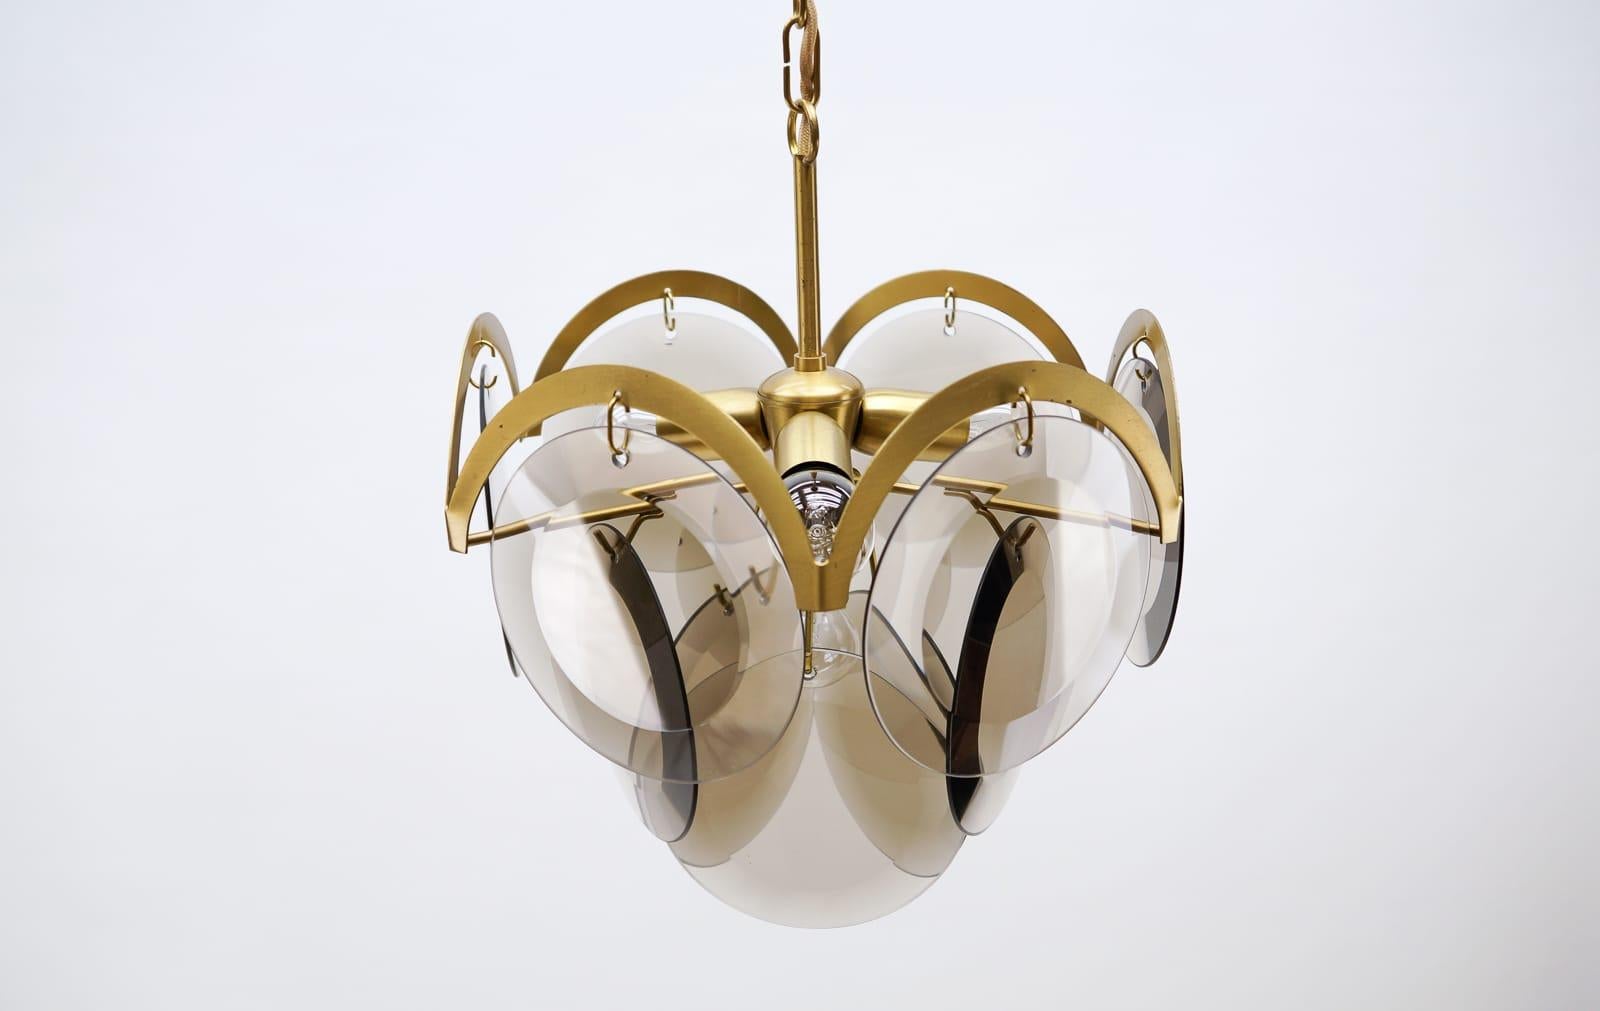 Metal Very Elegant & Delicate Hanging Lamp with Smoked Glass Panes, 1960s Italy For Sale